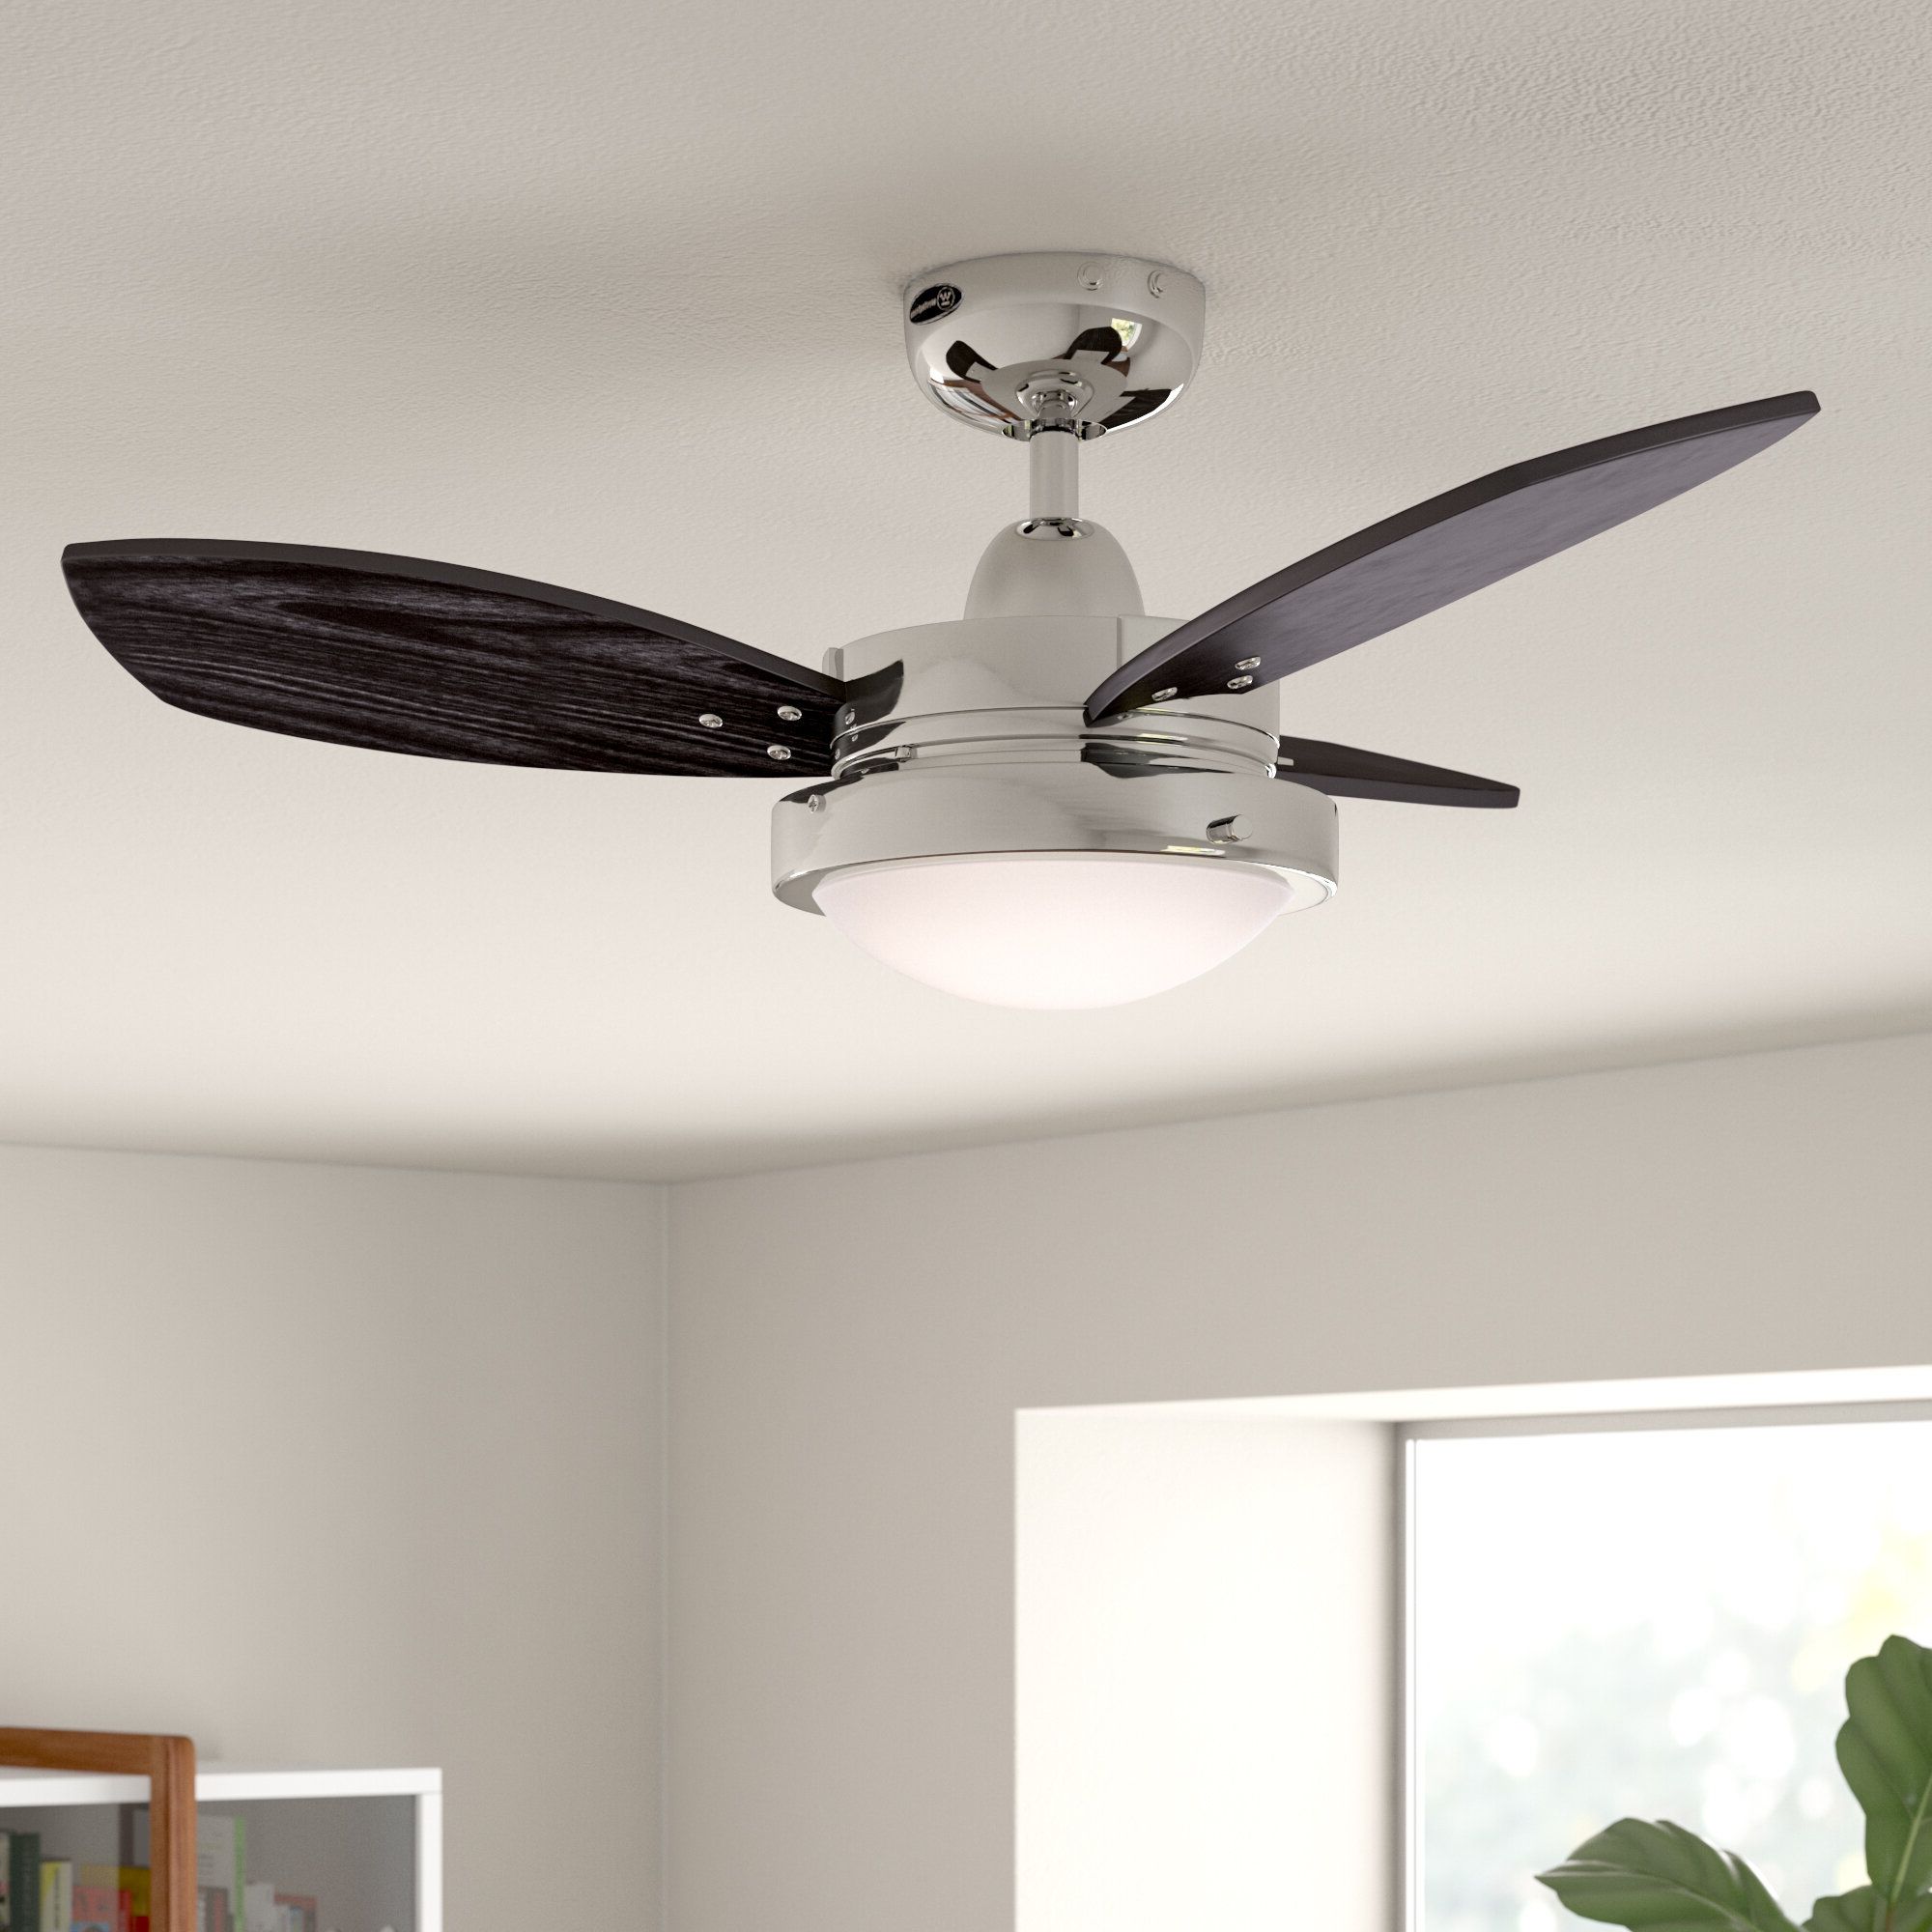 Heskett 3 Blade Led Ceiling Fans With Well Known 30" Heskett 3 Blade Led Ceiling Fan With Light Kit Included (View 1 of 20)